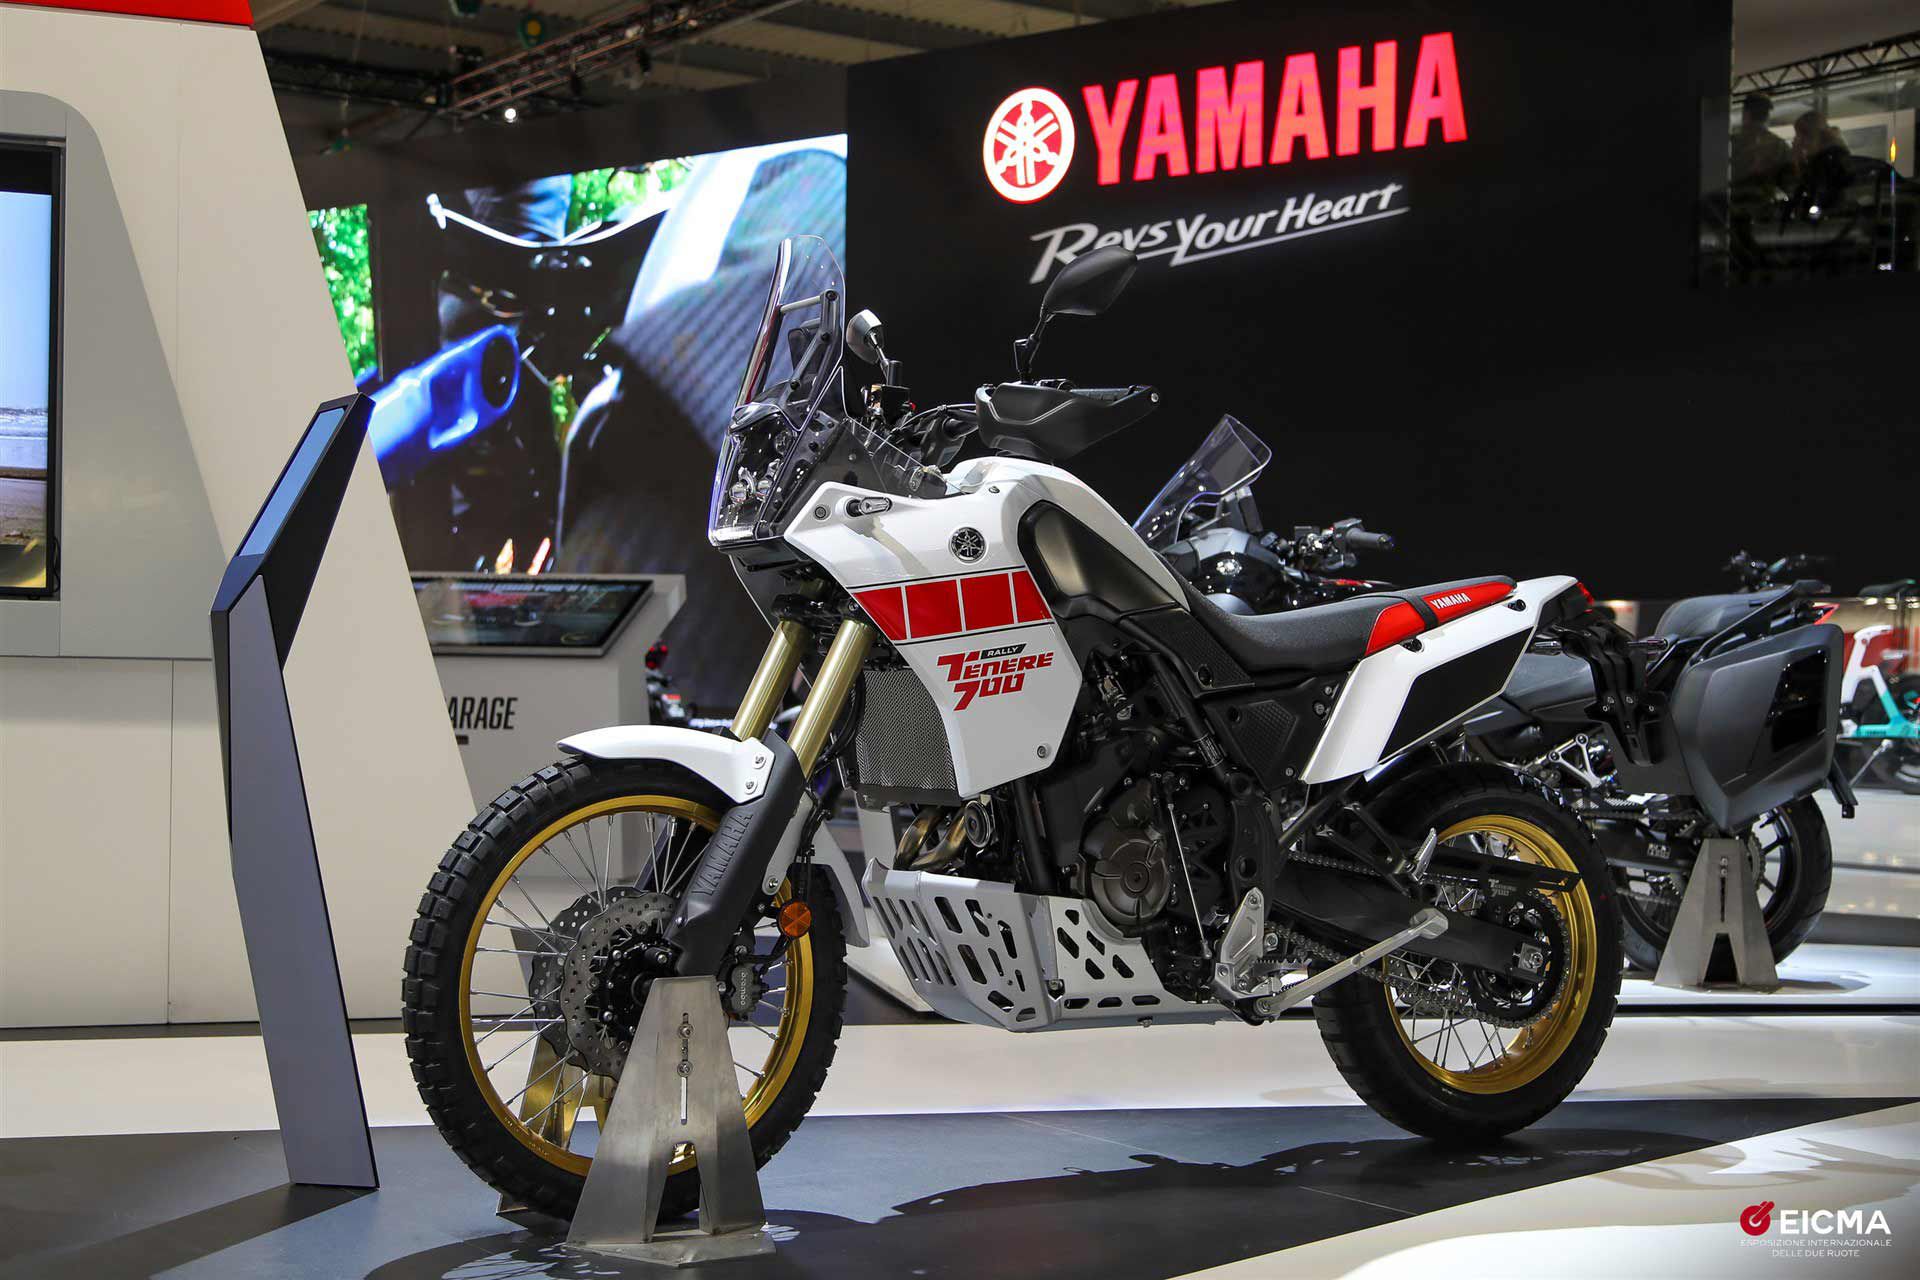 The Yamaha Ténéré made a lot of friends in the midsize ADV category this year. Or competitors, rather.